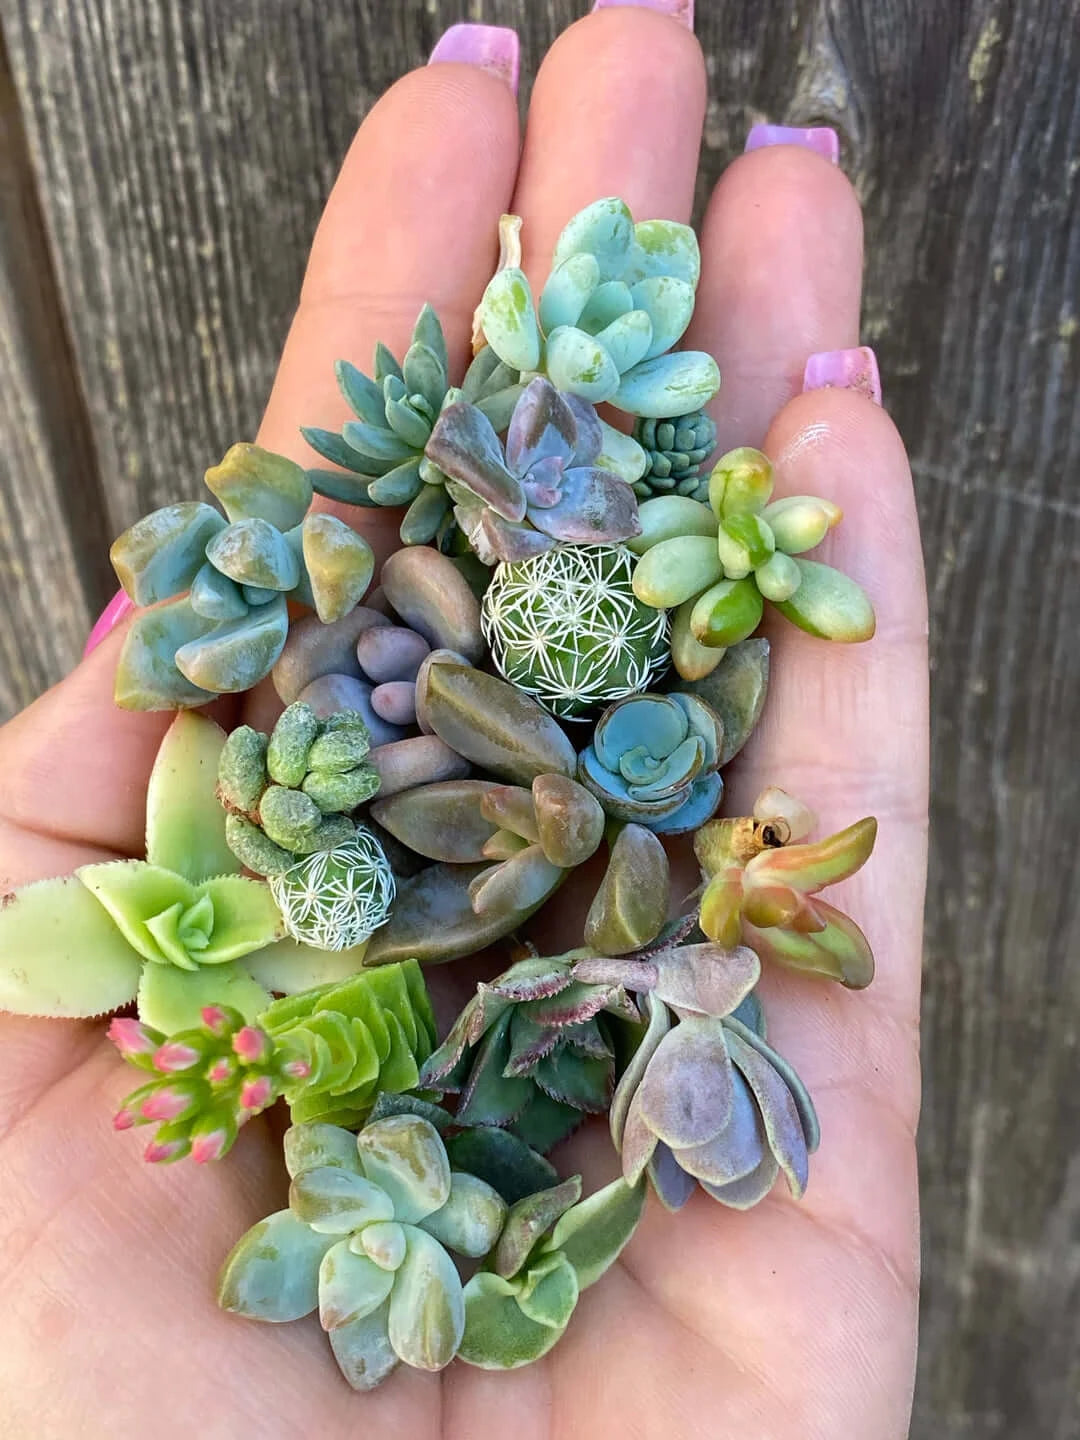 Hand cradling a colorful assortment of mini succulents, ideal for vibrant terrariums and plant crafts.